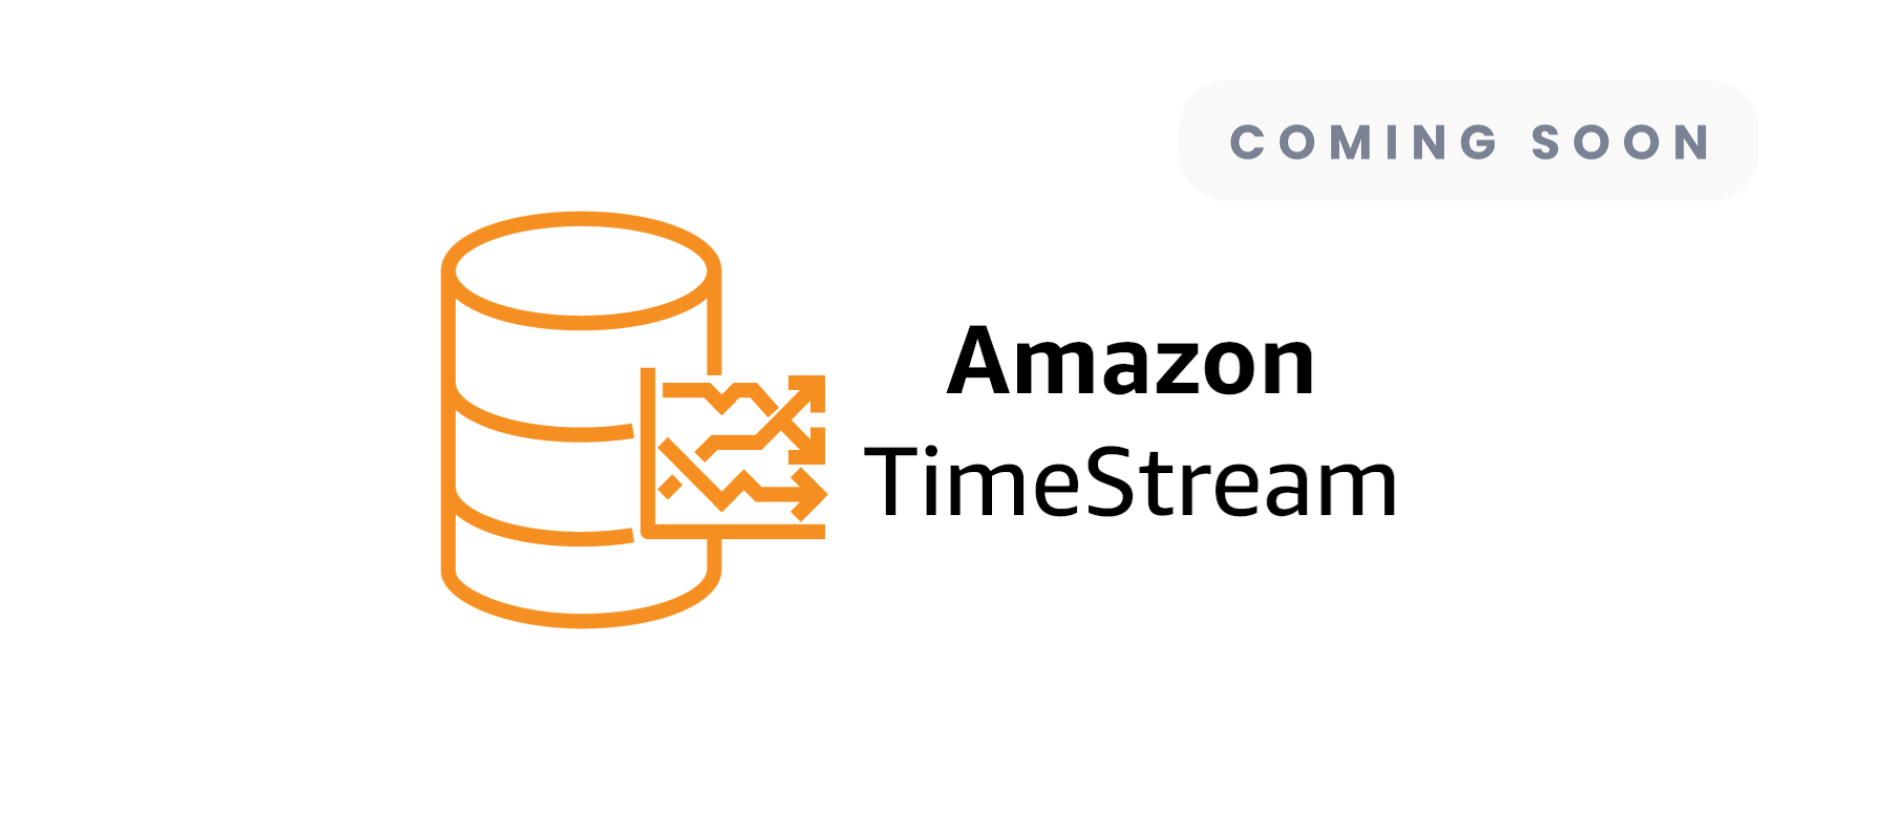 Data at Rest - Amazon TimeStream - Coming soon